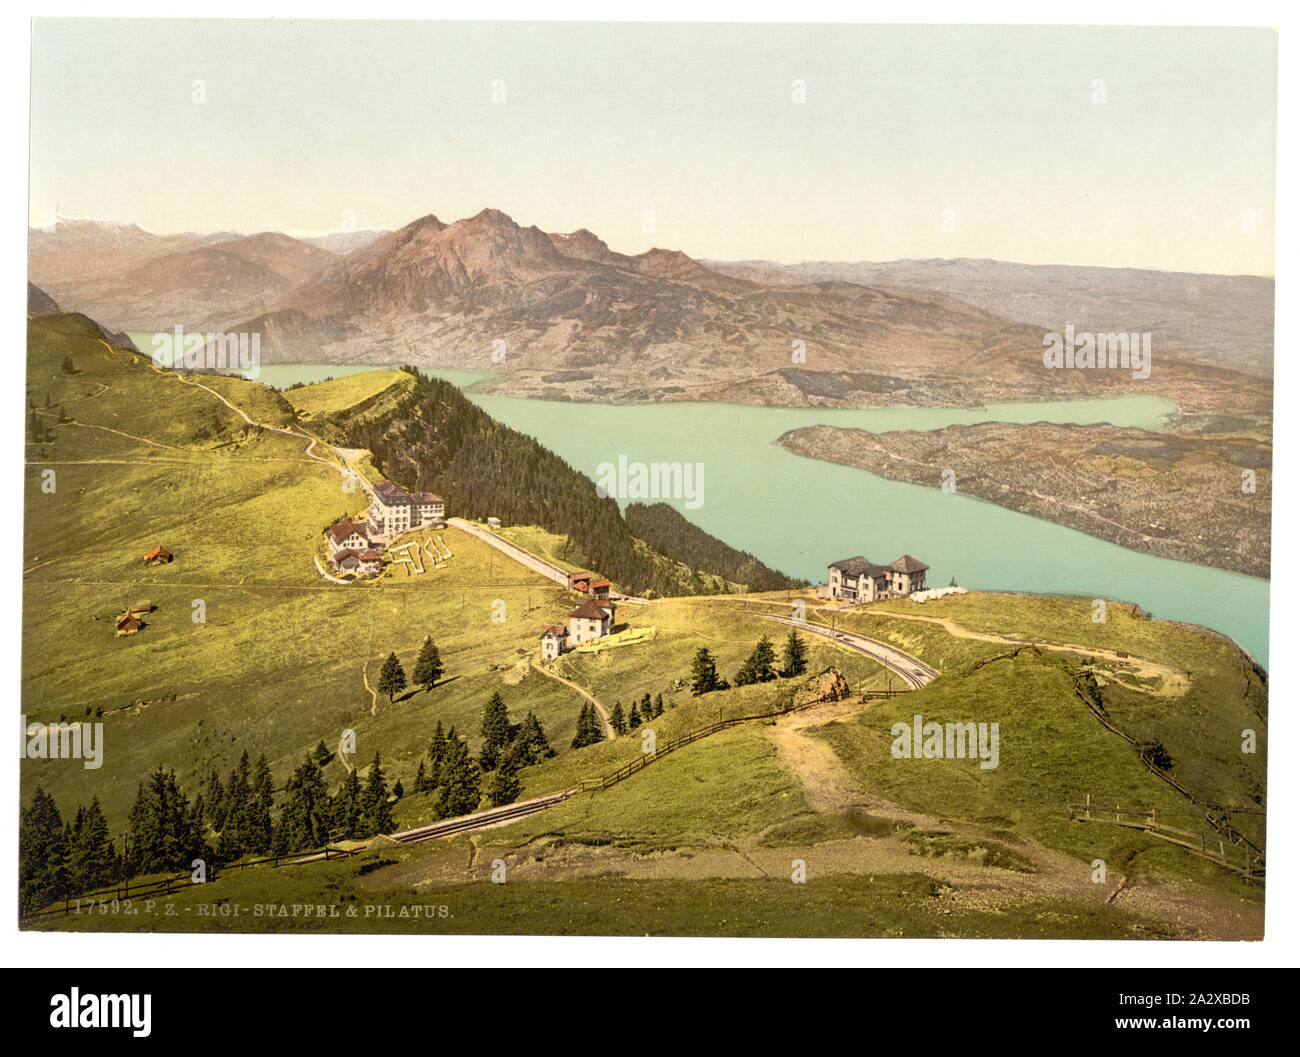 Rigi Staffel and Pilatus, Rigi, Switzerland; Print no. 17592.; Forms part of: Views of Switzerland in the Photochrom print collection.; Title from the Detroit Publishing Co., Catalogue J-foreign section, Detroit, Mich. : Detroit Publishing Company, 1905.; Stock Photo